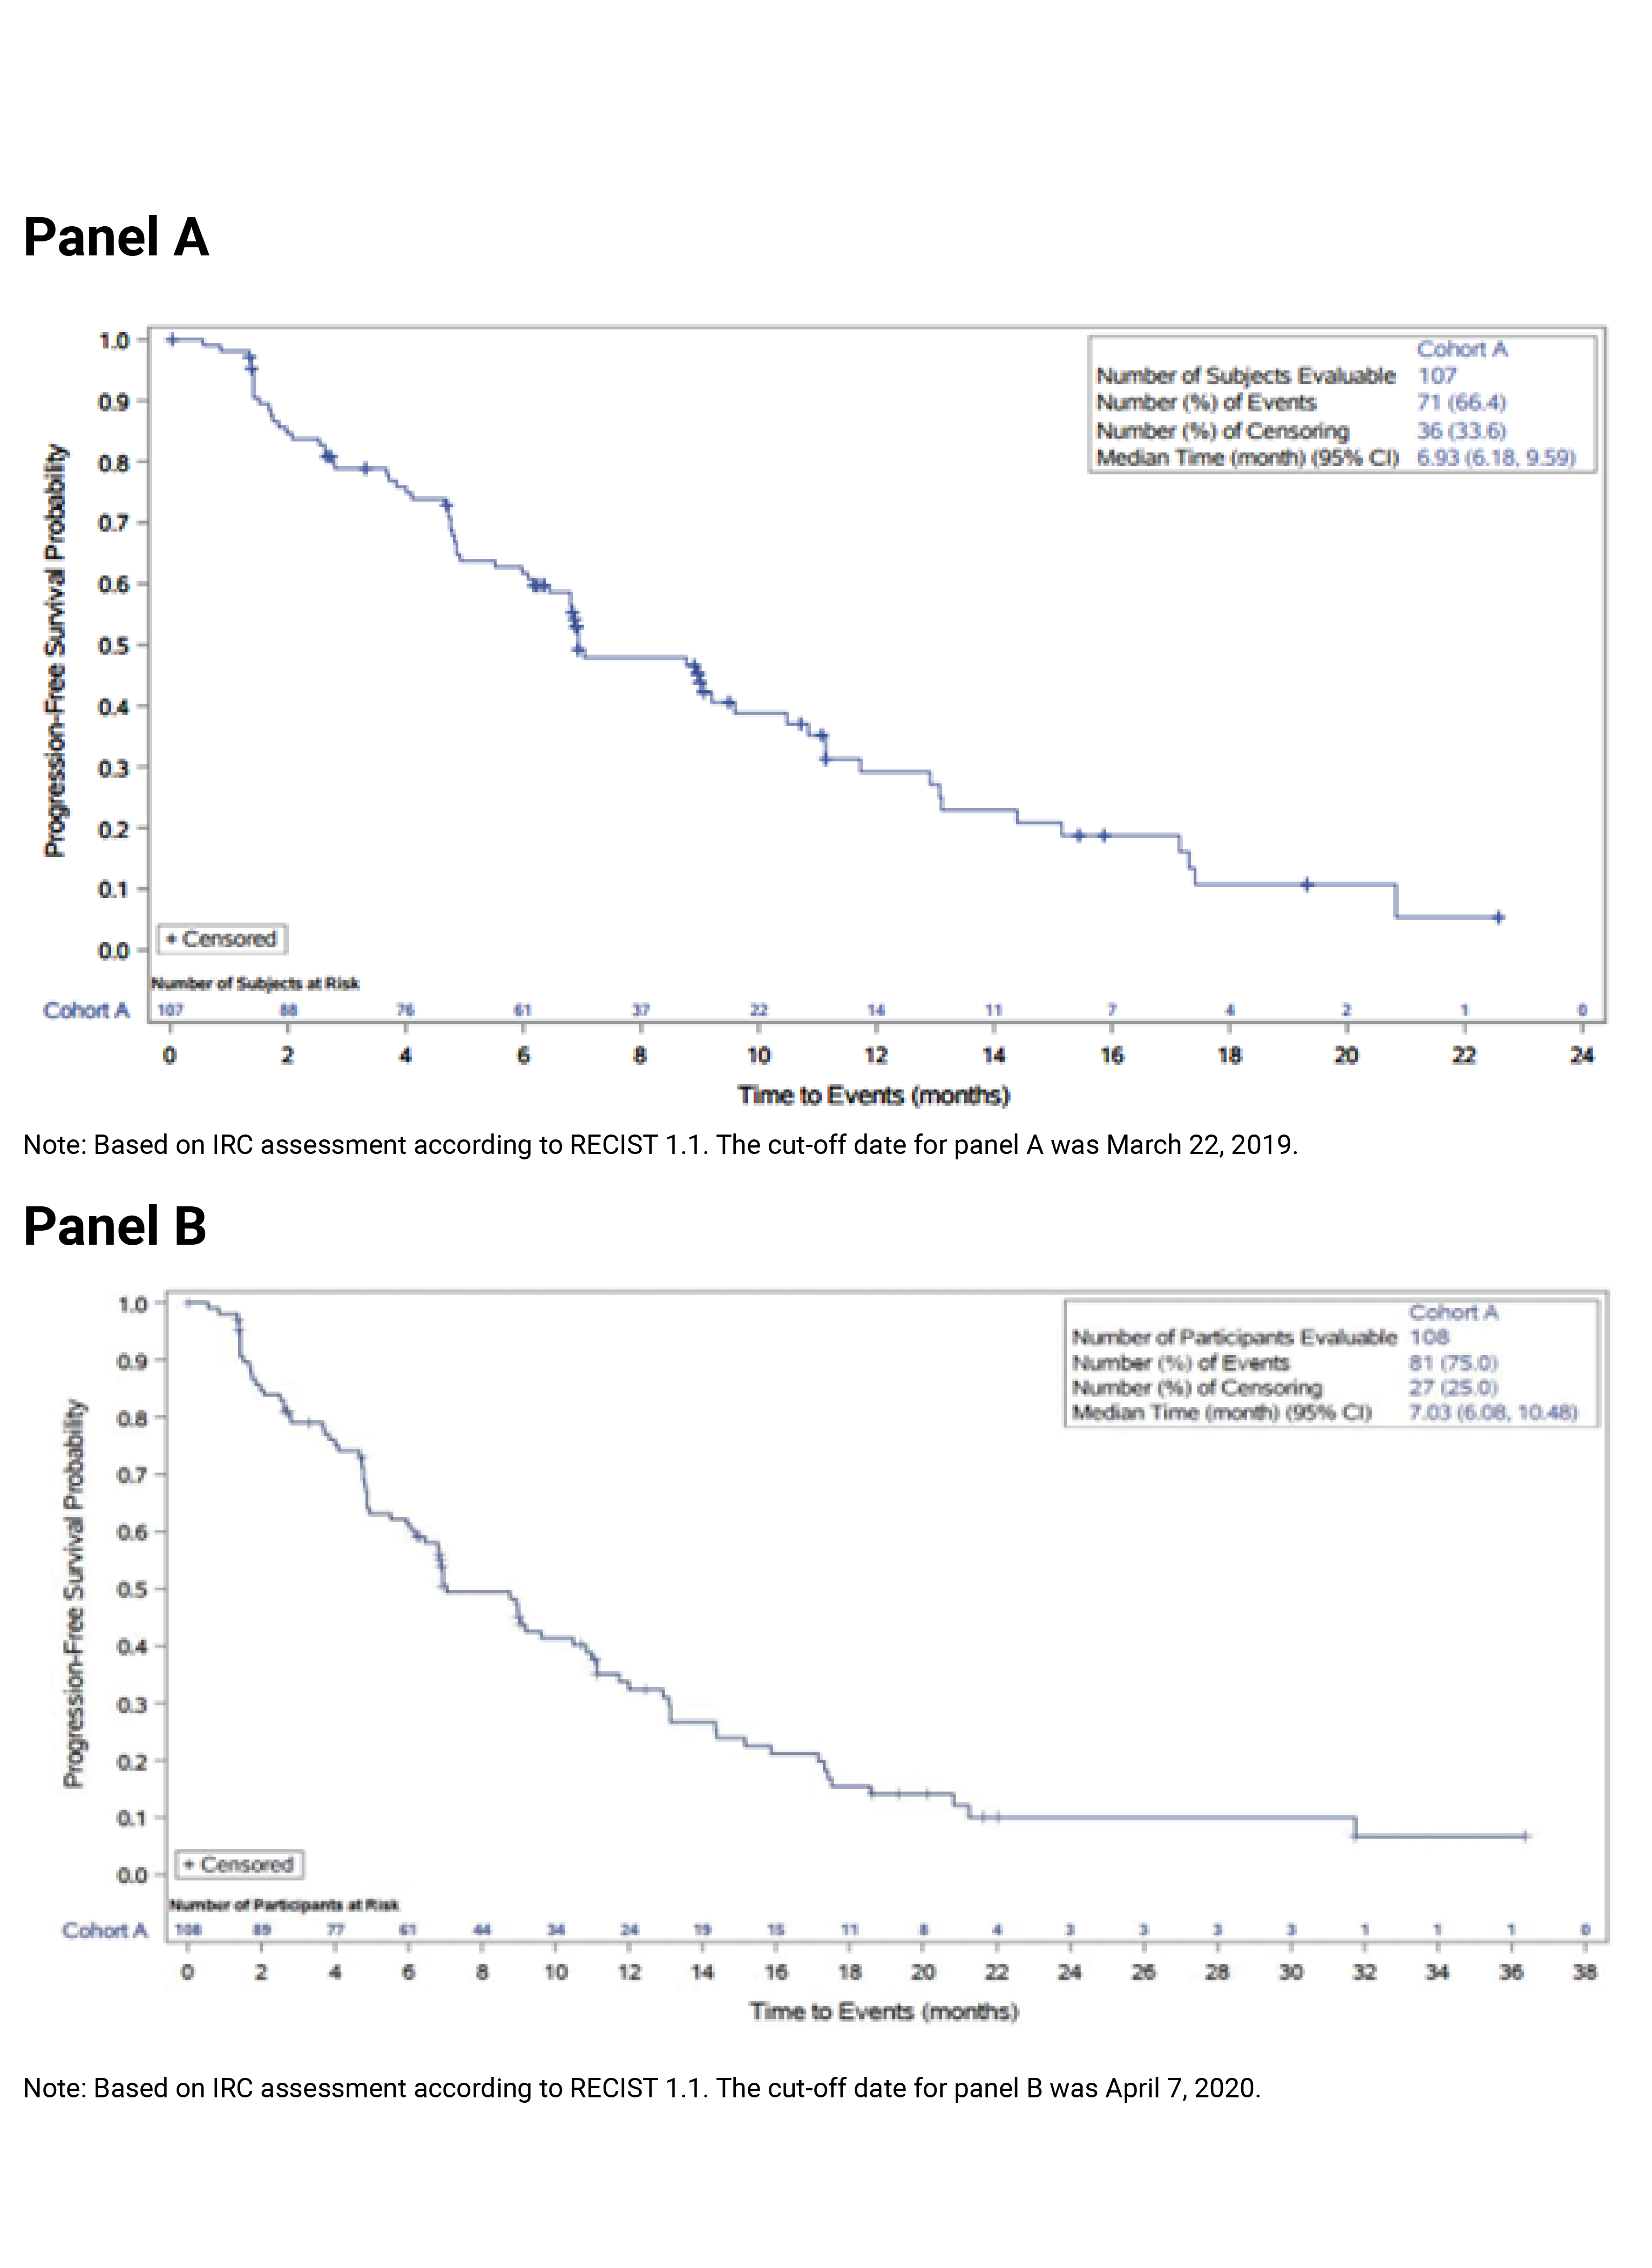 At the March 22, 2019, data cut-off date, the Kaplan–Meier curve of PFS for patients in Cohort A of the FIGHT-202 trial decreased over time with a moderate slope. The curve ended at approximately 23 months. At the April 7, 2020, data cut-off date, the Kaplan–Meier curve of PFS for patients in Cohort A of the FIGHT-202 trial decreased over time. The curve ended at approximately 37 months.